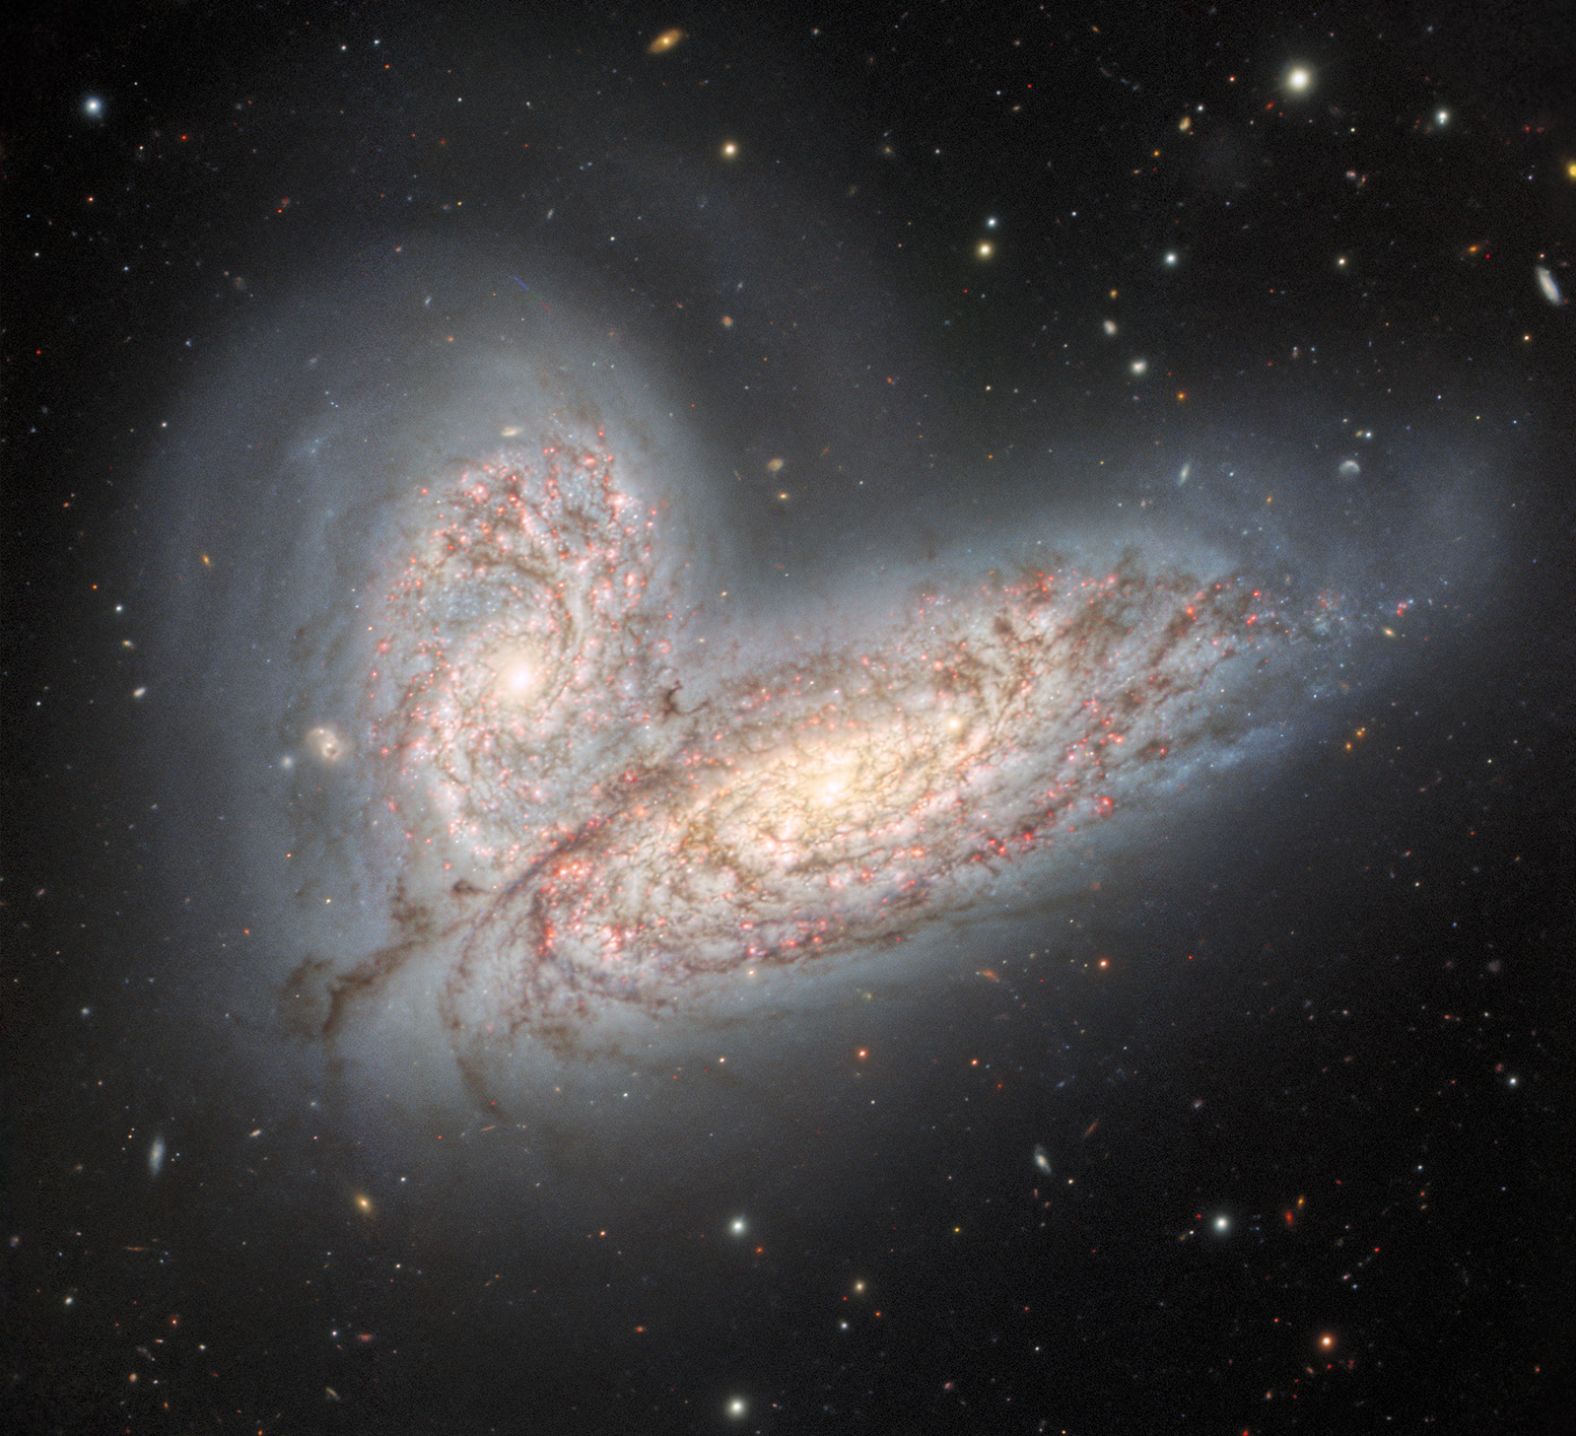 The Gemini North telescope in Hawaii captured this image showing <a href="https://www.cnn.com/2022/08/10/world/colliding-galaxies-gemini-north-image-scn/index.html" target="_blank">two entangled galaxies</a> that will eventually merge into one millions of years from now. It's a preview of the eventual fate of our own Milky Way galaxy.